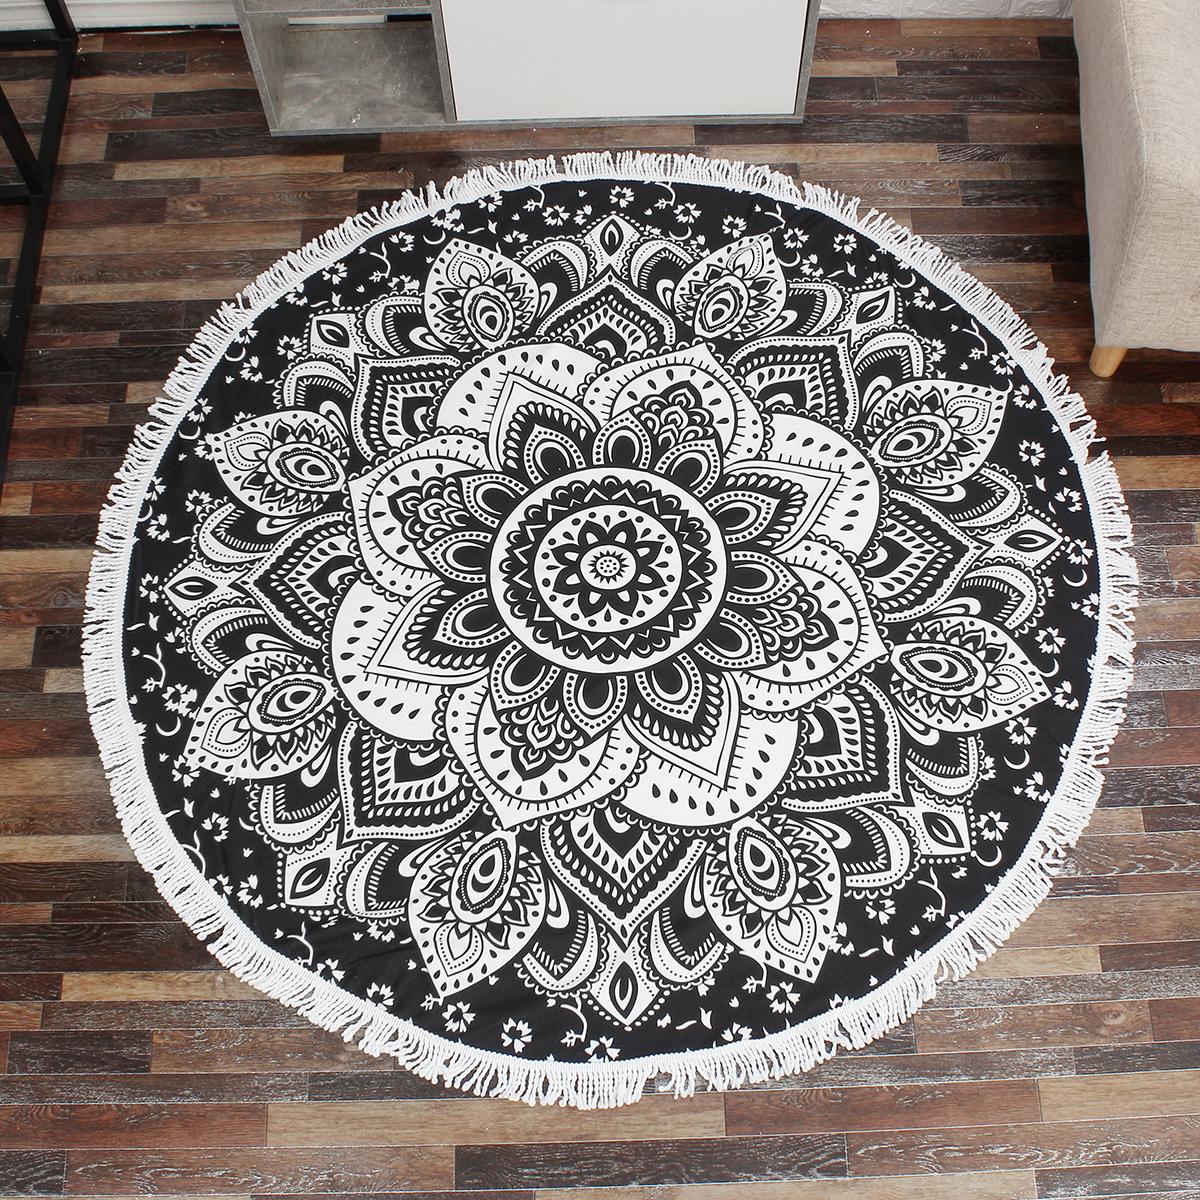 1M15M-Round-Beach-Towel-Tassel-Tapestry-Yoga-Mats-Blankets-Home-Fitness-Decoration-Accessories-1678169-16